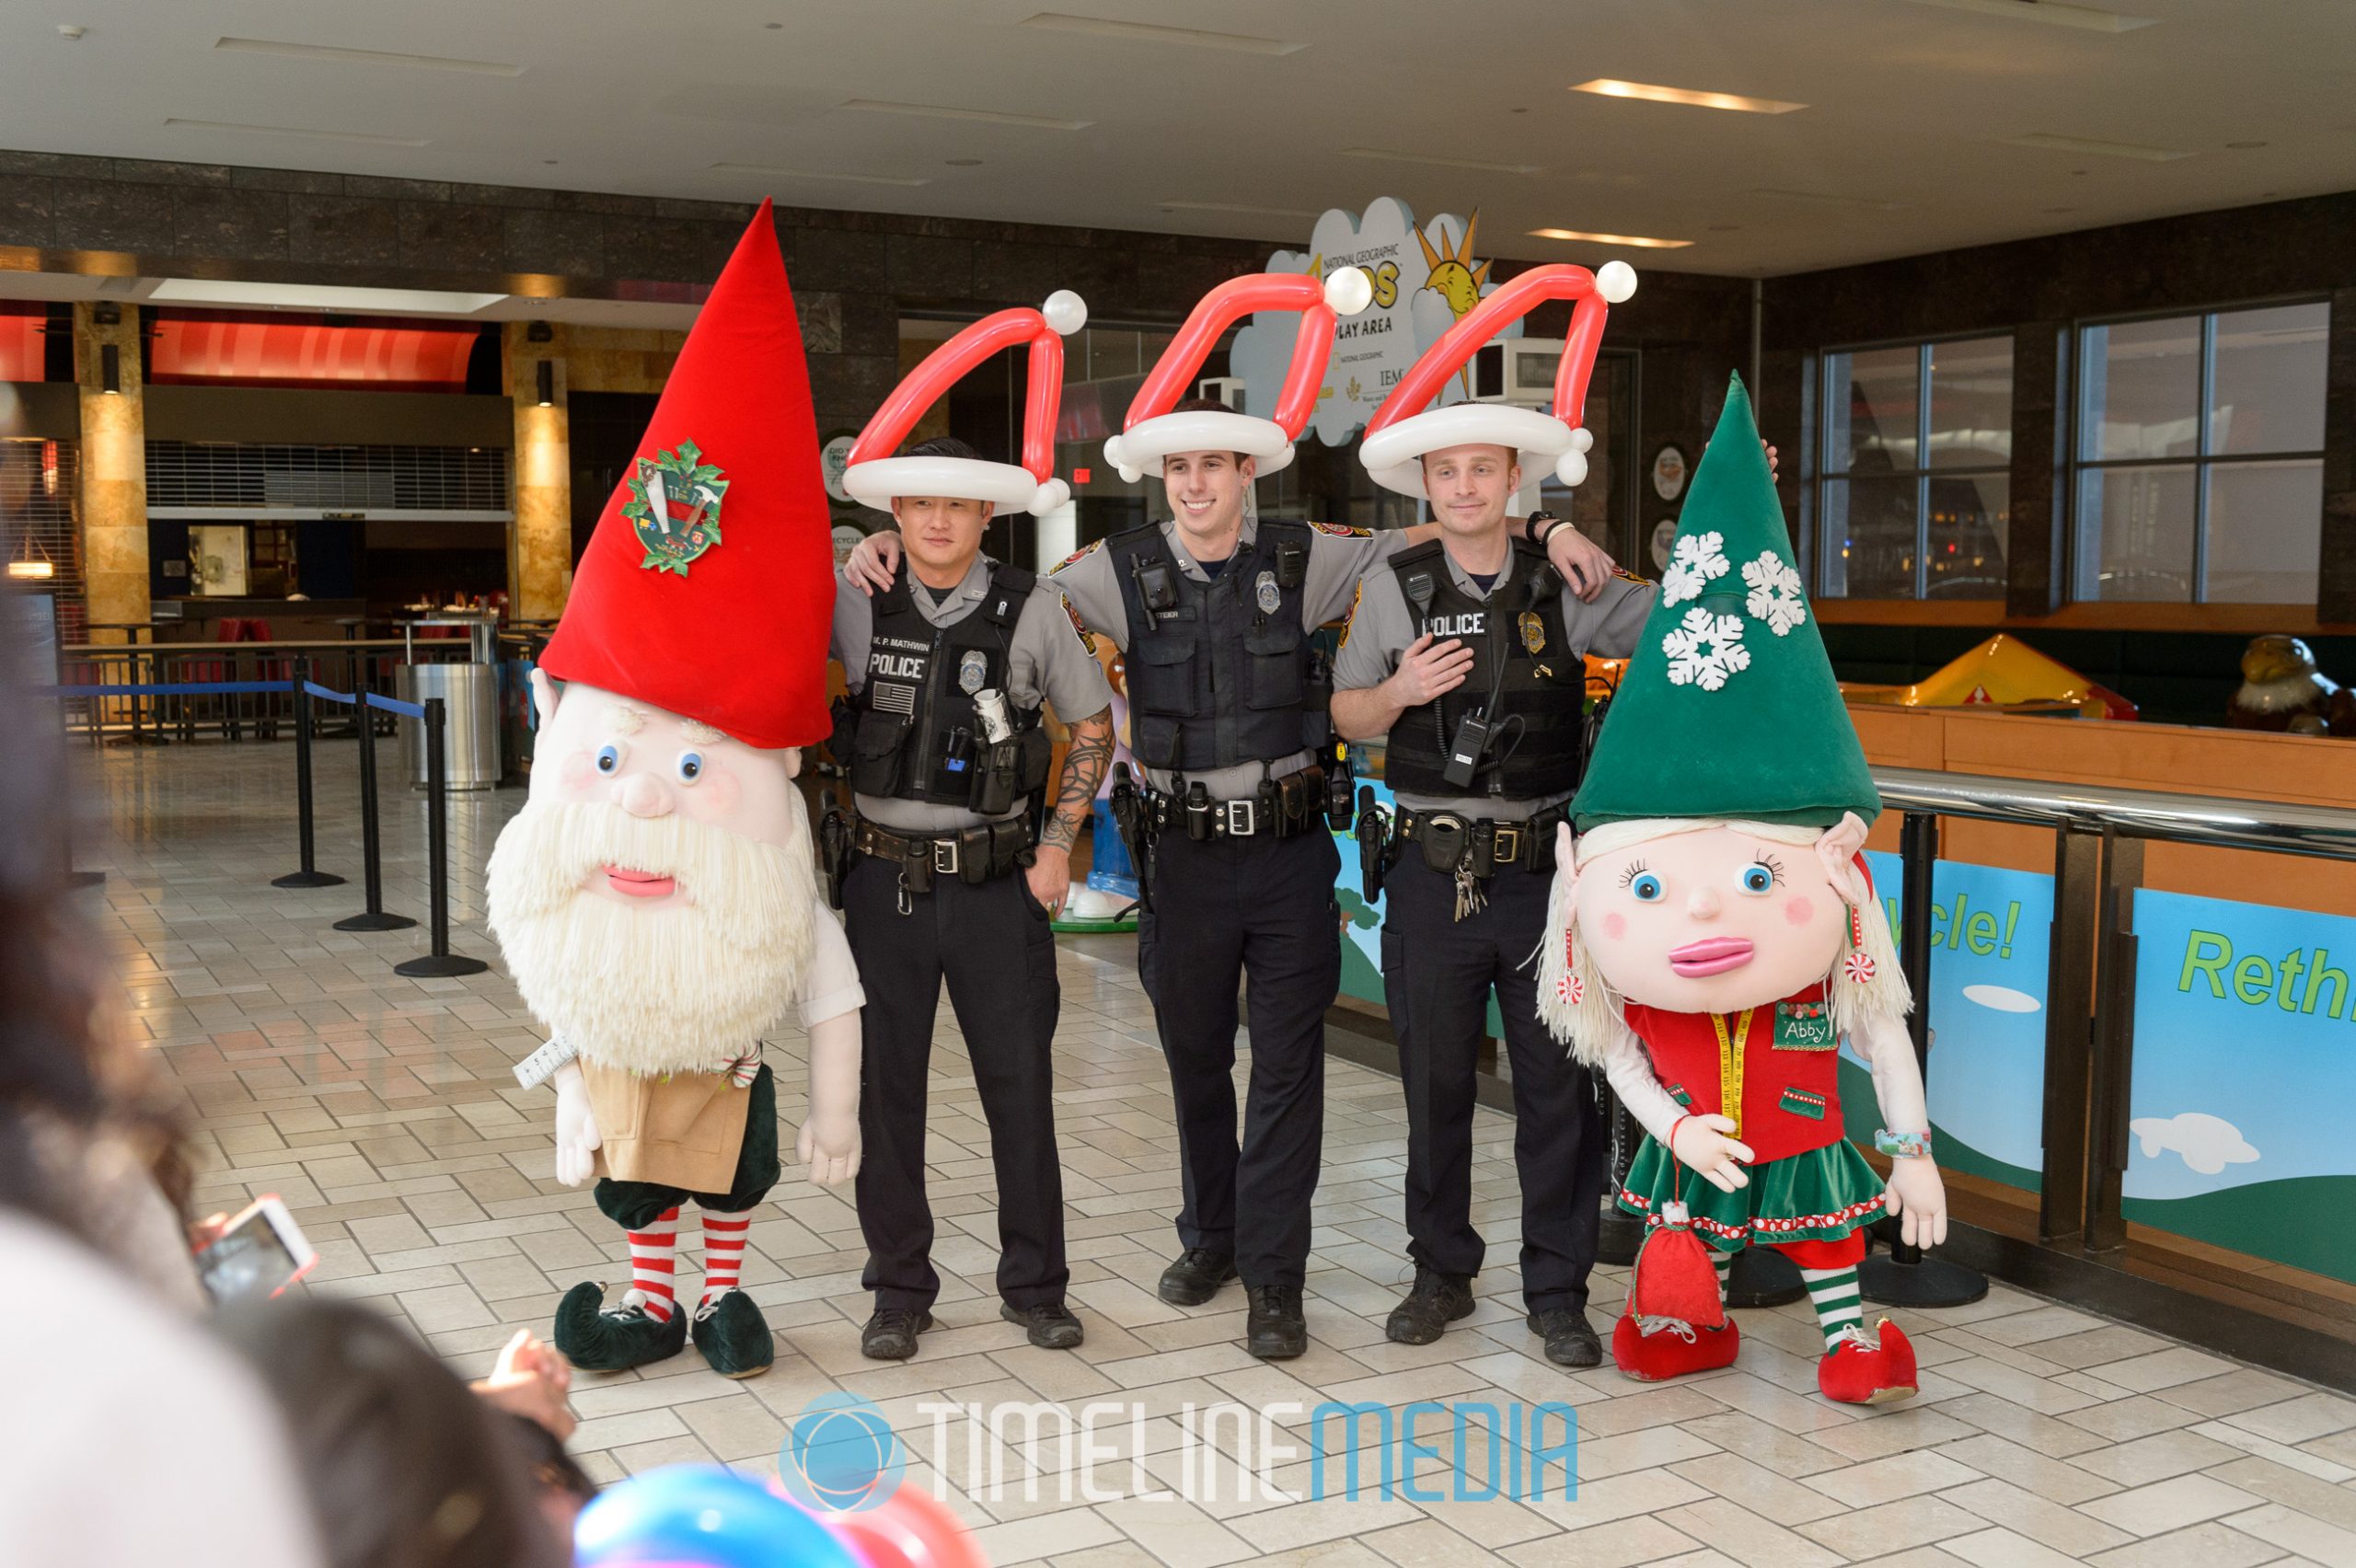 Those Funny Little People and Fairfax County Police officers - Tysons Corner Center